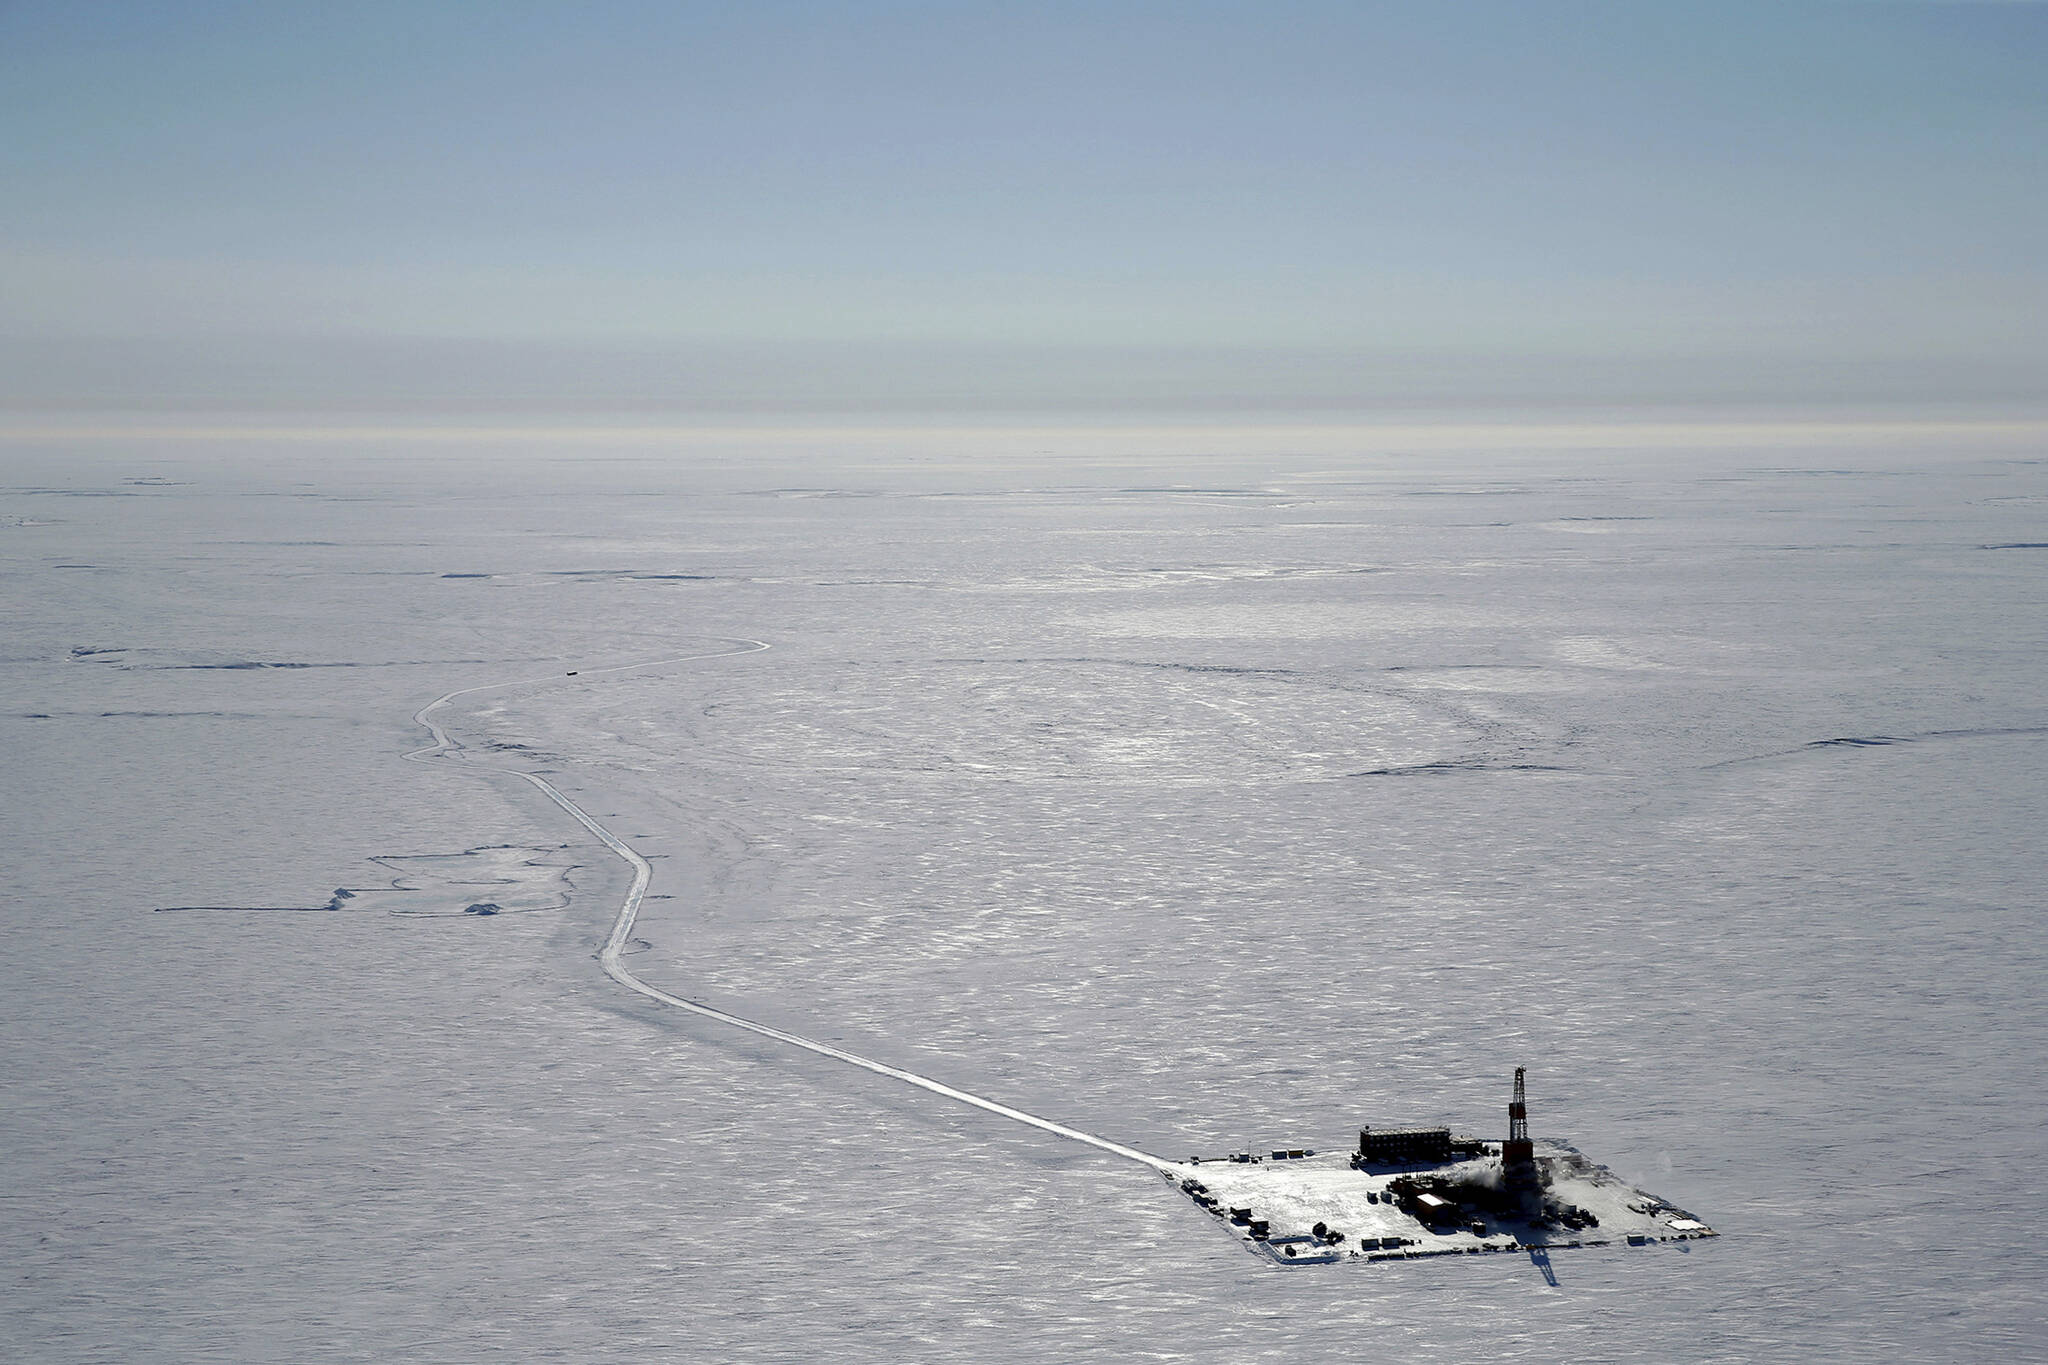 This 2019 aerial photo provided by ConocoPhillips shows an exploratory drilling camp at the proposed site of the Willow oil project on Alaska’s North Slope. The Biden administration is weighing approval of a major oil project on Alaska’s petroleum-rich North Slope that supporters say represents an economic lifeline for Indigenous communities in the region but environmentalists say is counter to Biden’s climate goals. A decision on ConocoPhillips Alaska’s Willow project, in a federal oil reserve roughly the size of Indiana, could come by early March 2023. (ConocoPhillips via AP)